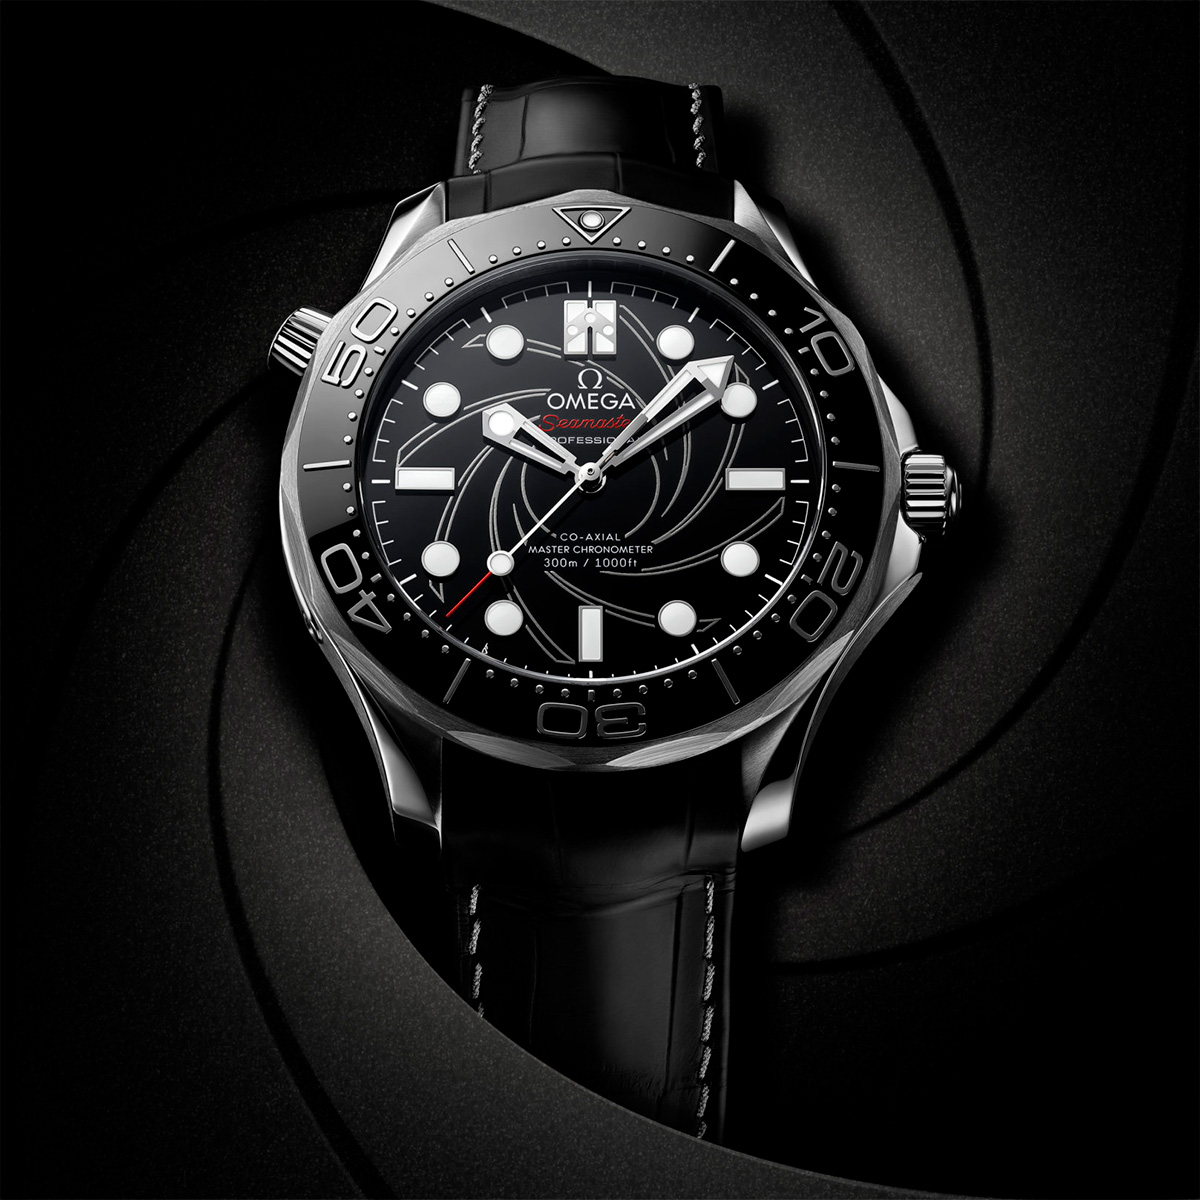 Omega Goes Platinum-Gold For New James Bond Seamaster Numbered Edition  Watch | Bond Lifestyle